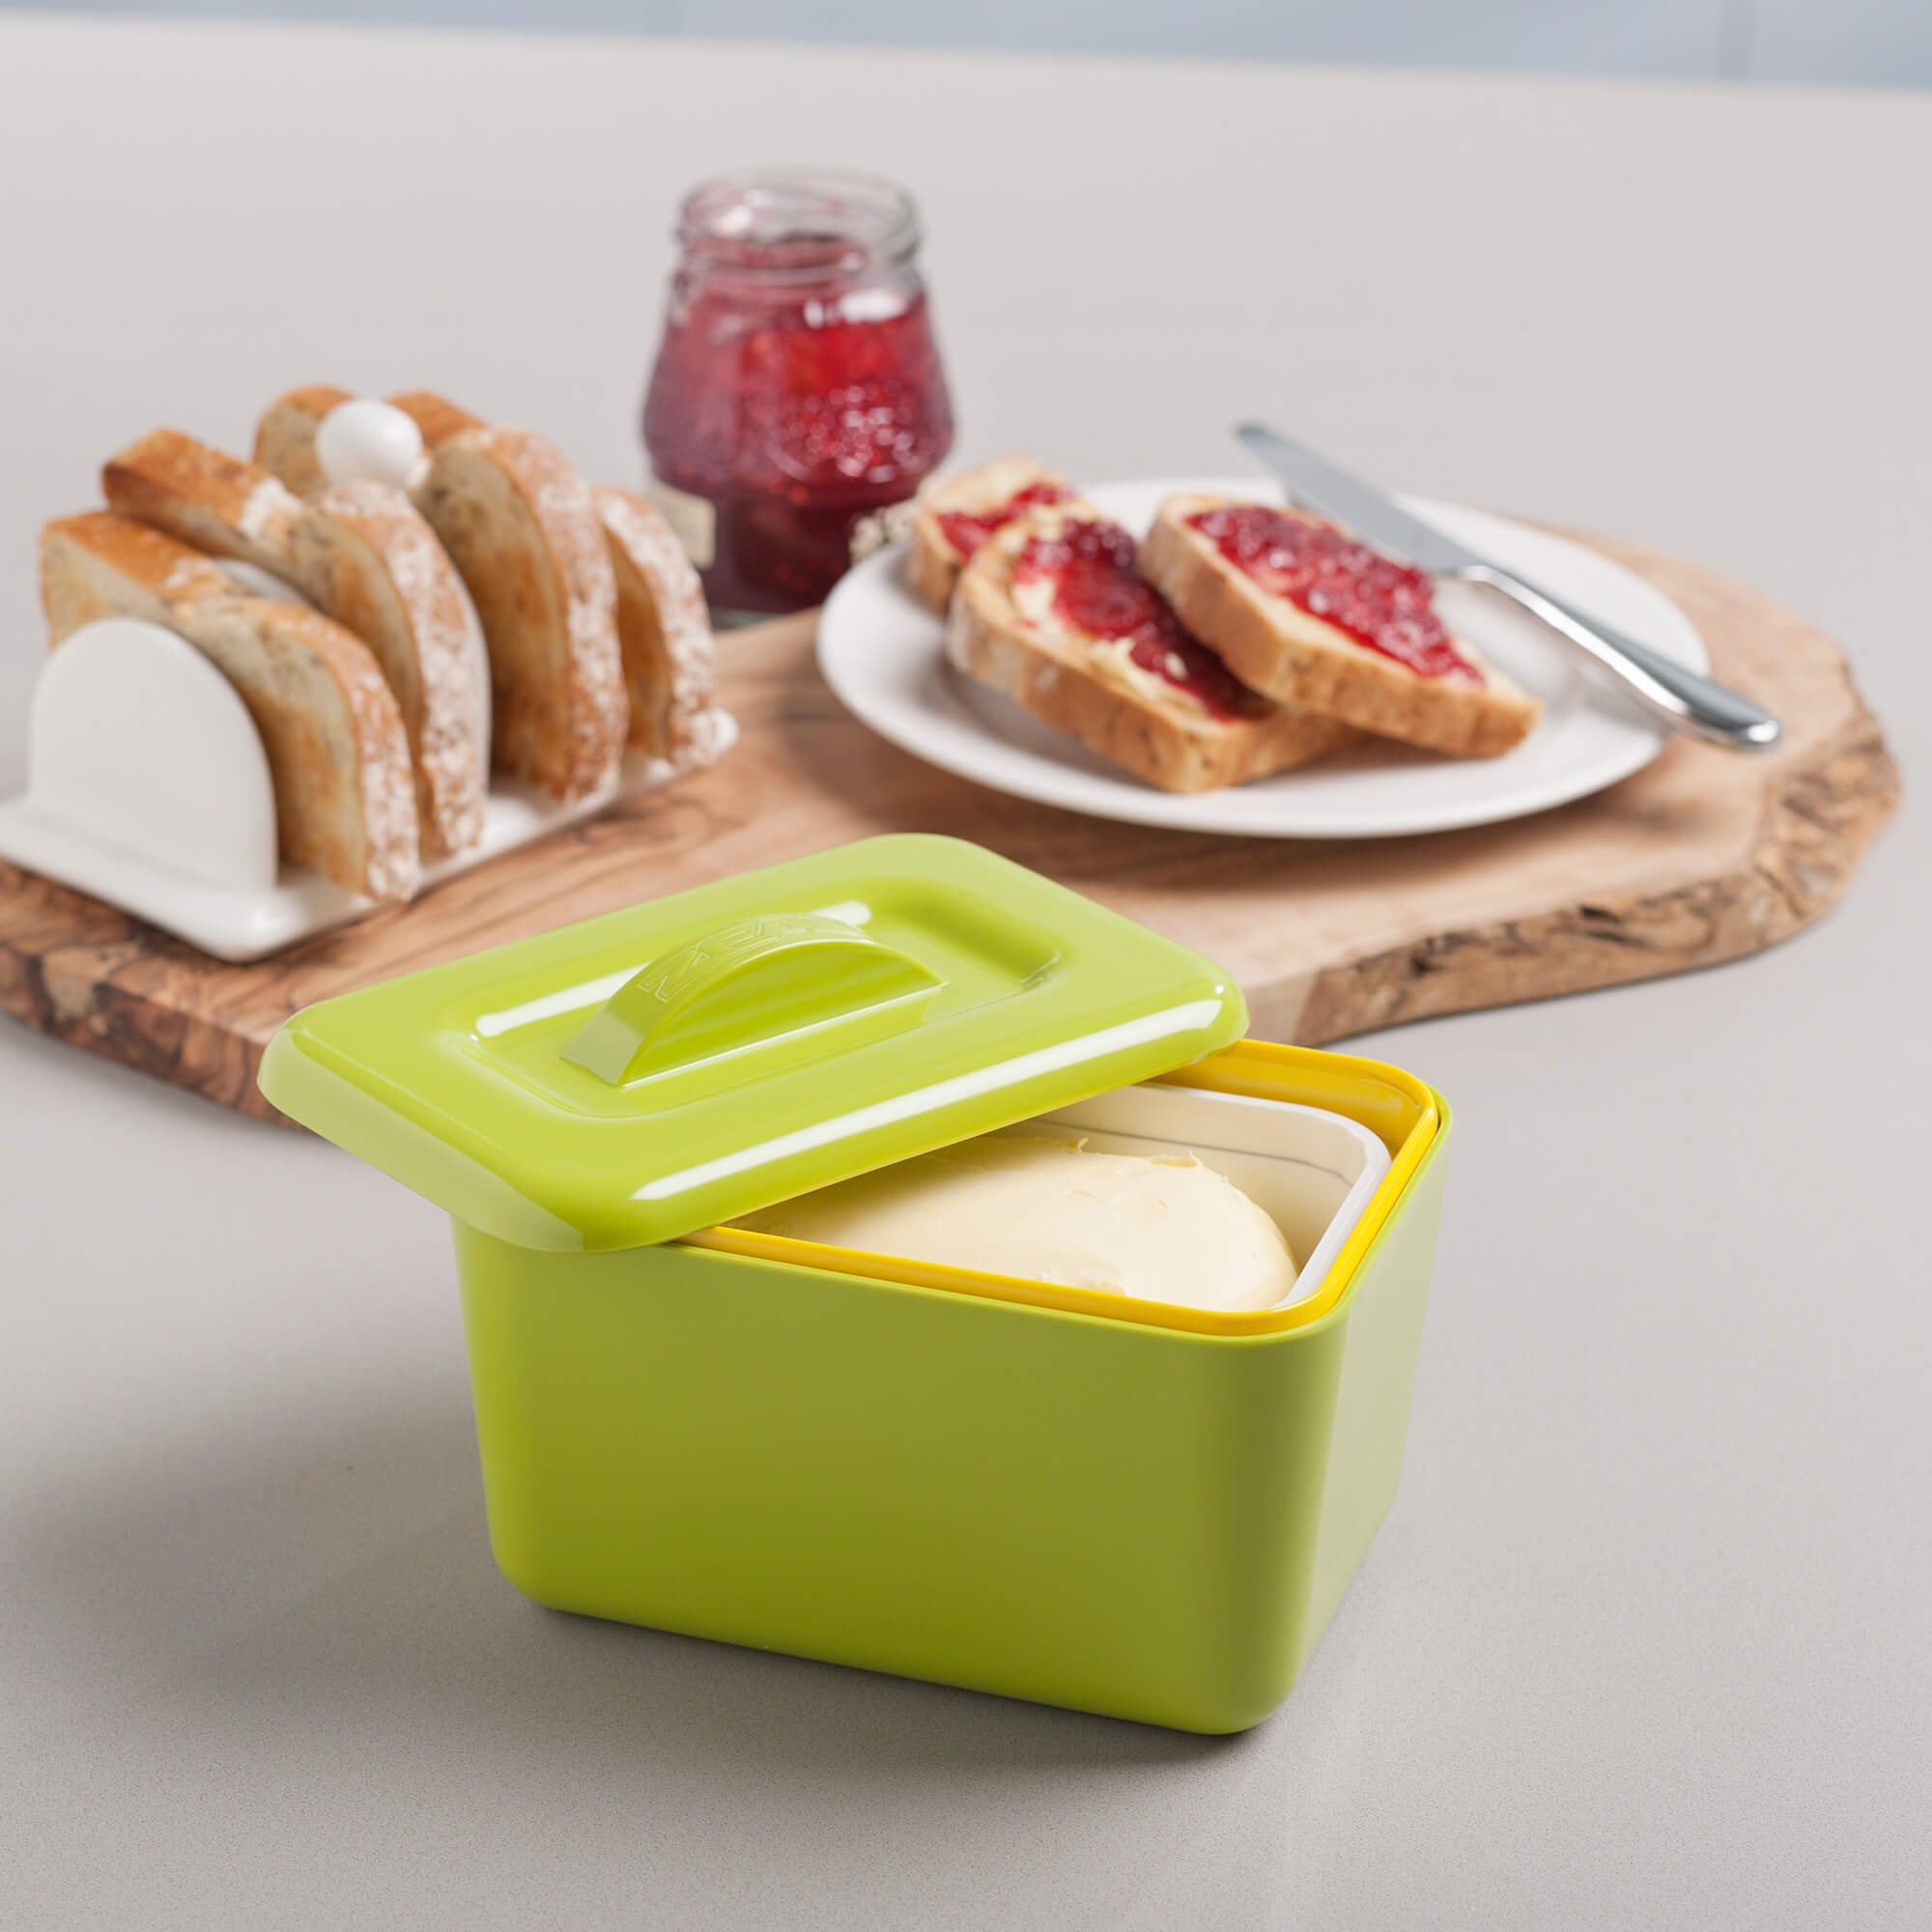 Breakfast table with toast, jam and a Zeal Butter Dish in Lime